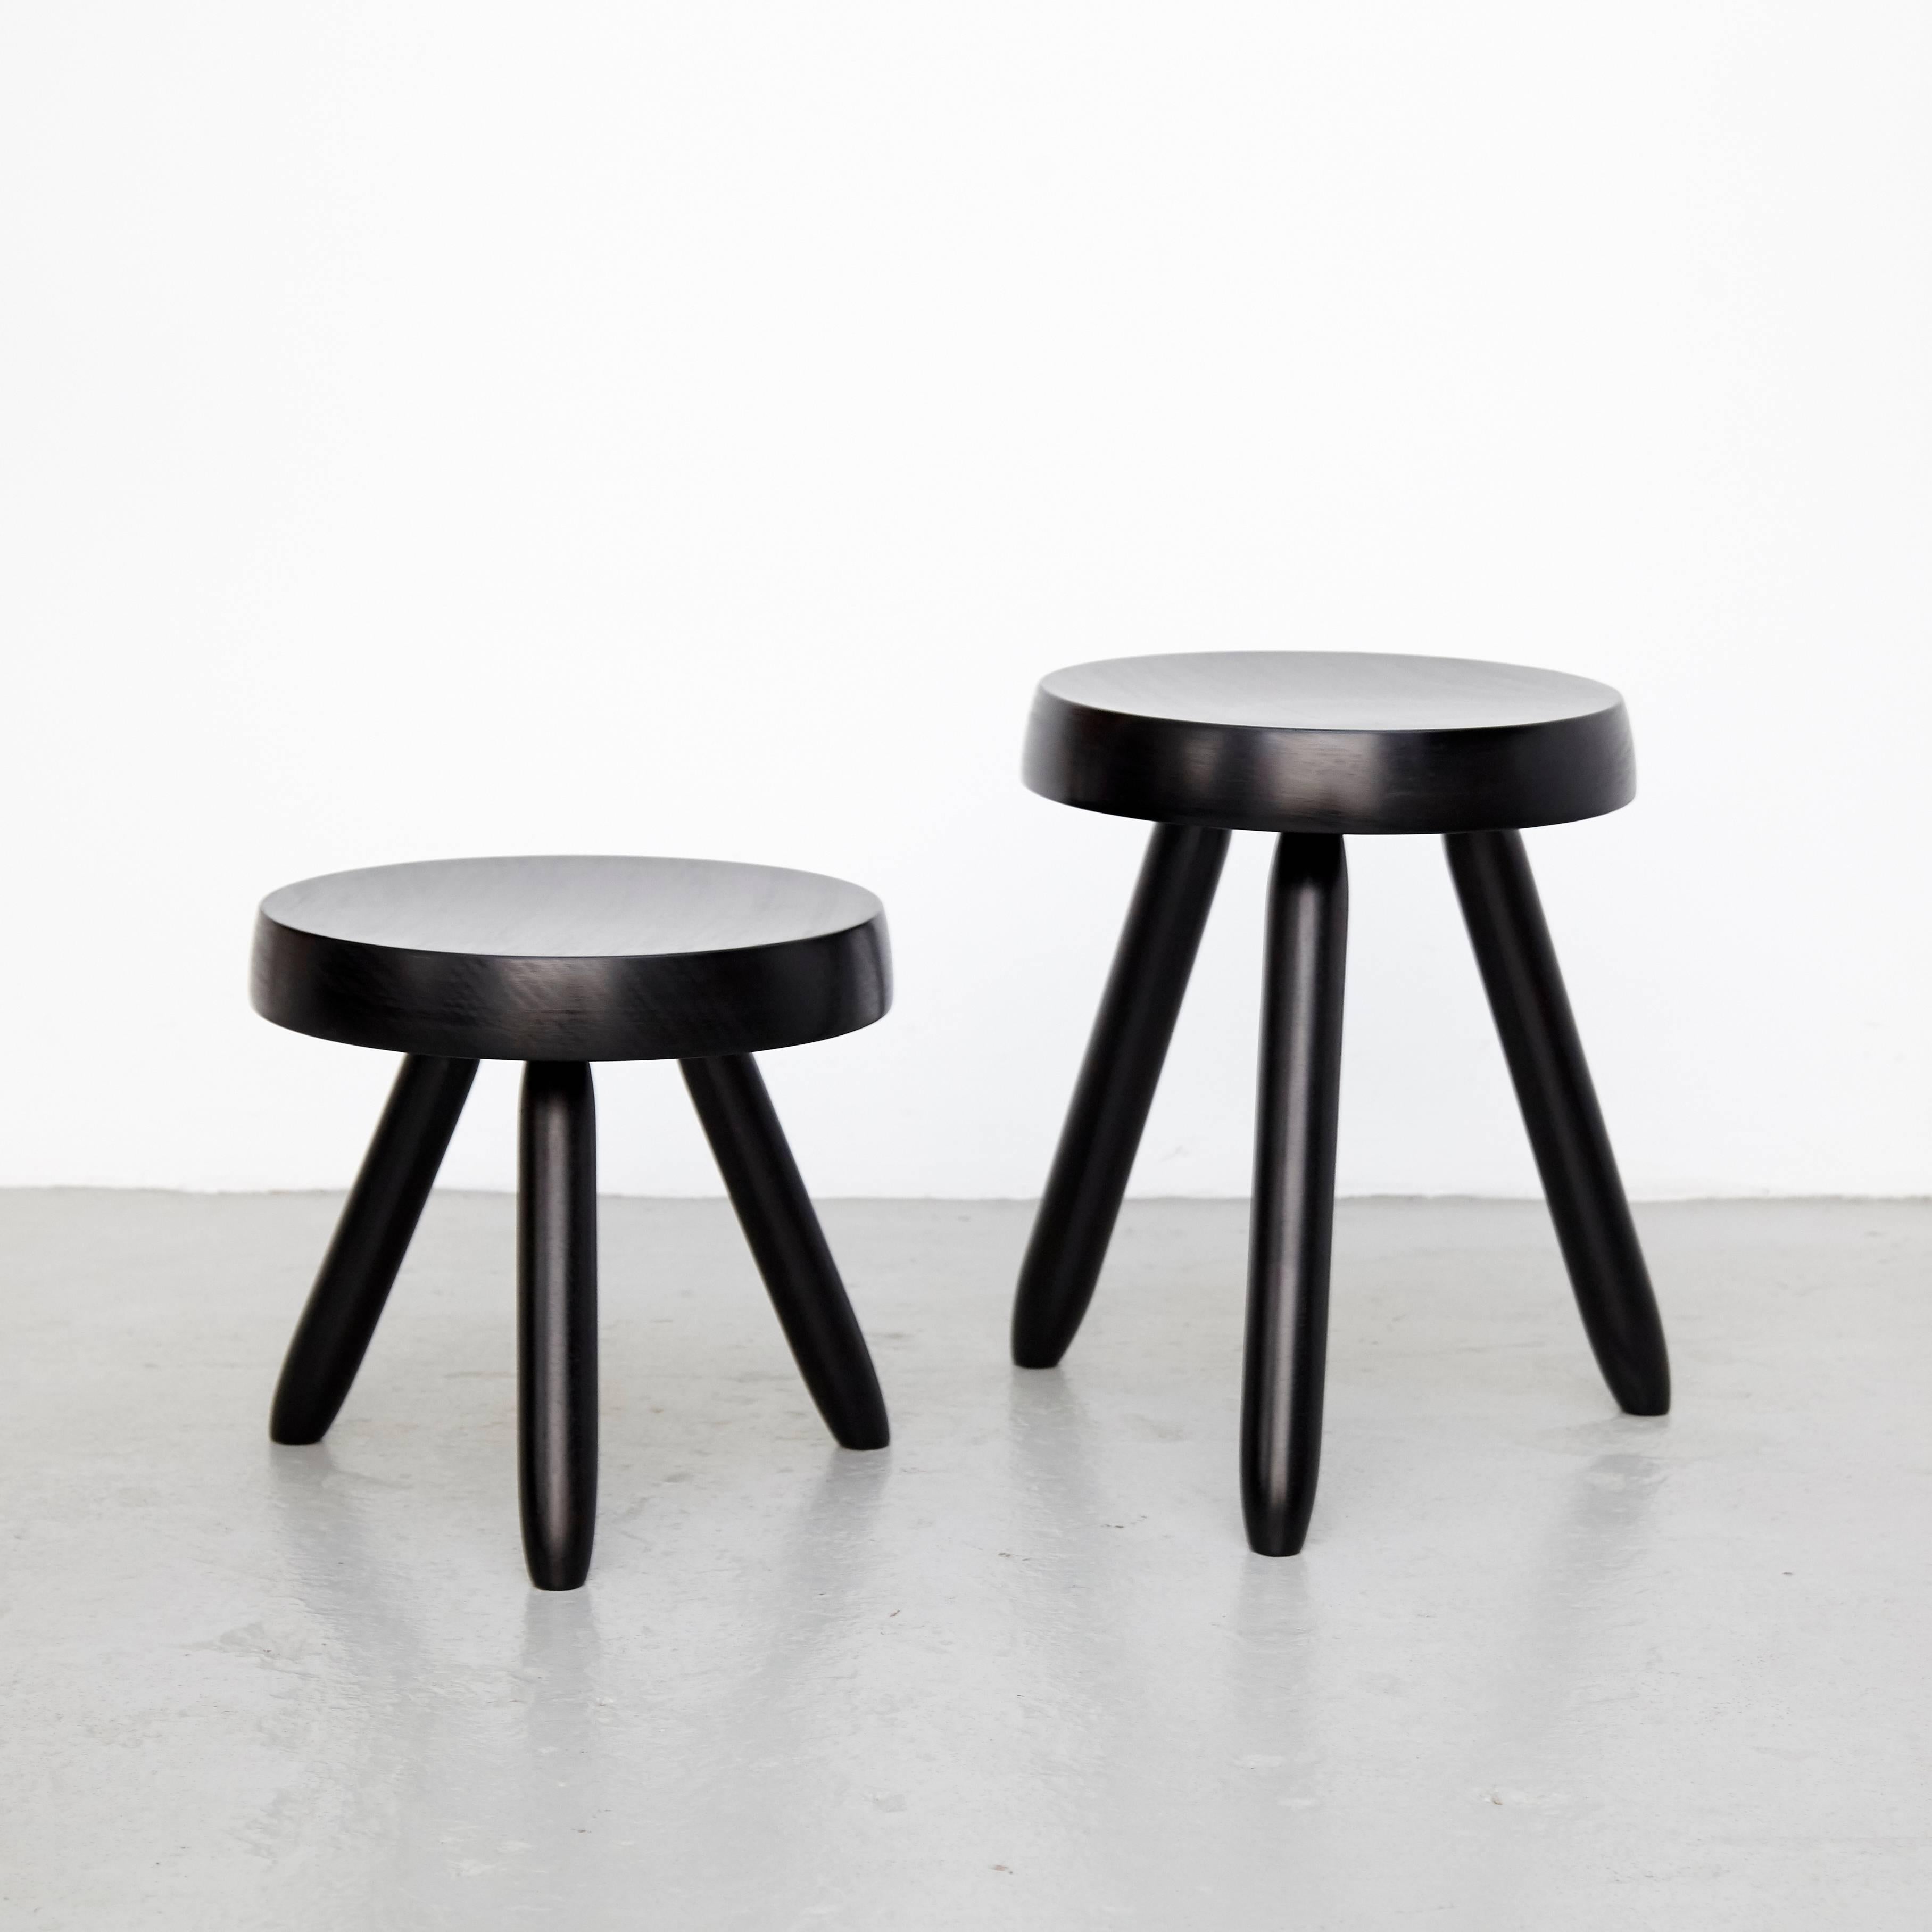 Set of three stools designed in the style of Charlotte Perriand.
Made by unknown manufacturer.

In good original condition, preserving a beautiful patina, with minor wear consistent with age and use. 

Charlotte Perriand (1903-1999) She was